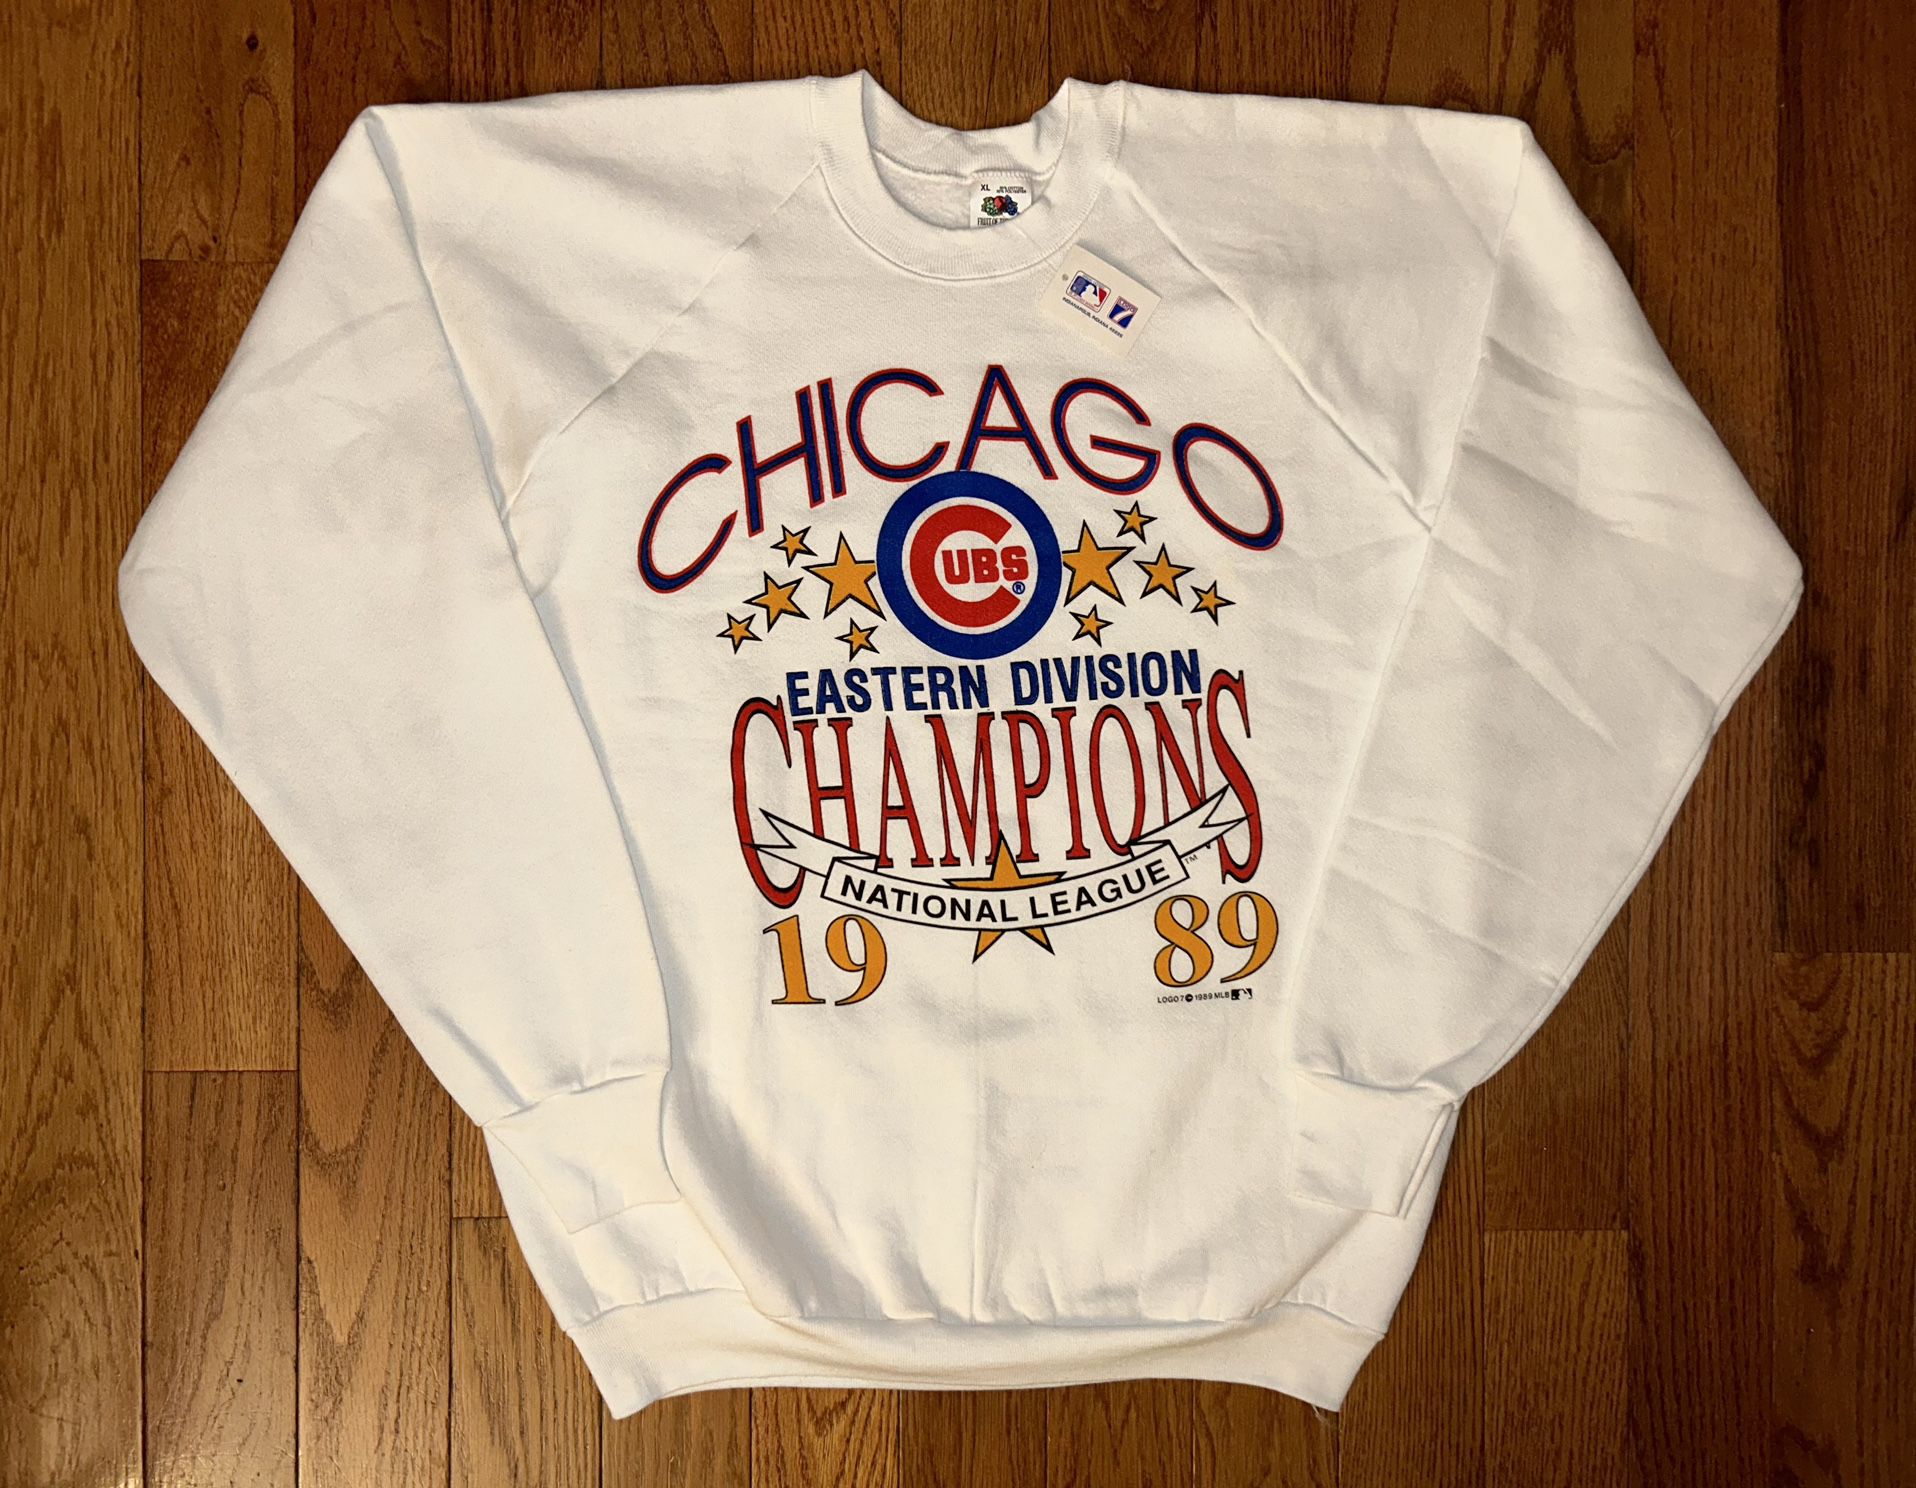 Chicago Cubs 1989 Eastern Division Champions Crewneck Sz XL NEW